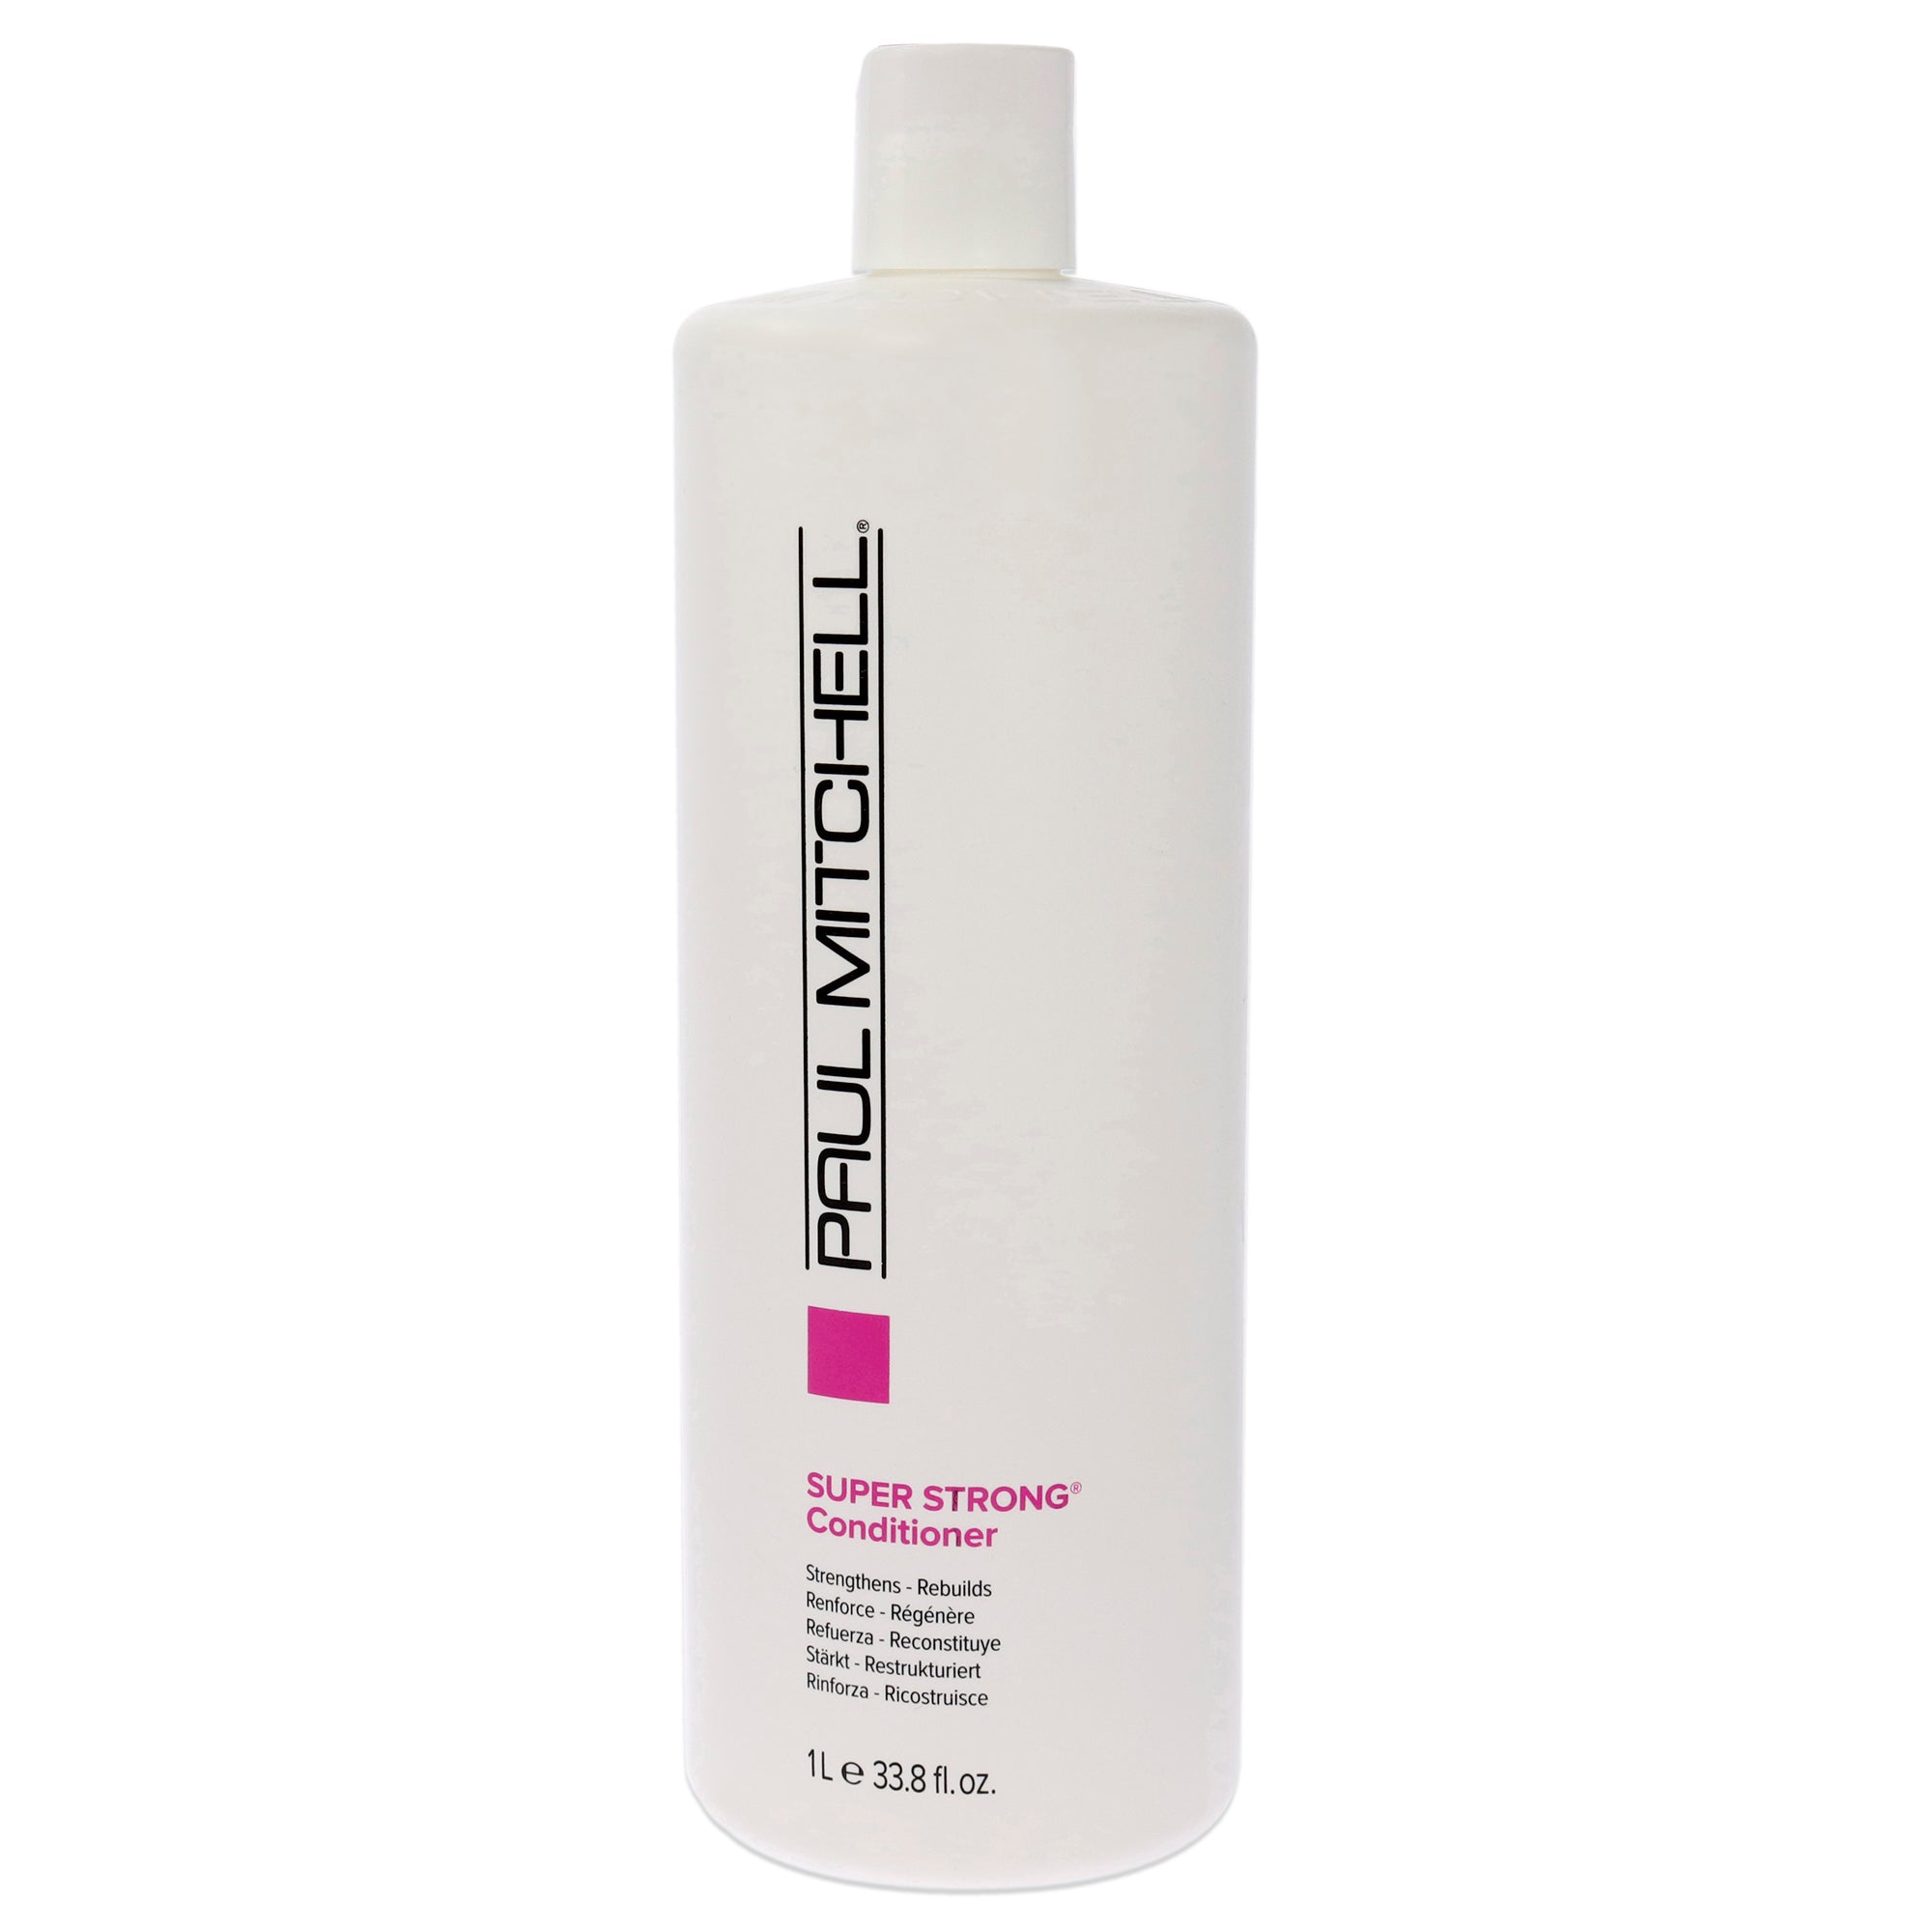 Super Strong Conditioner by Paul Mitchell for Unisex - 33.8 oz Conditioner